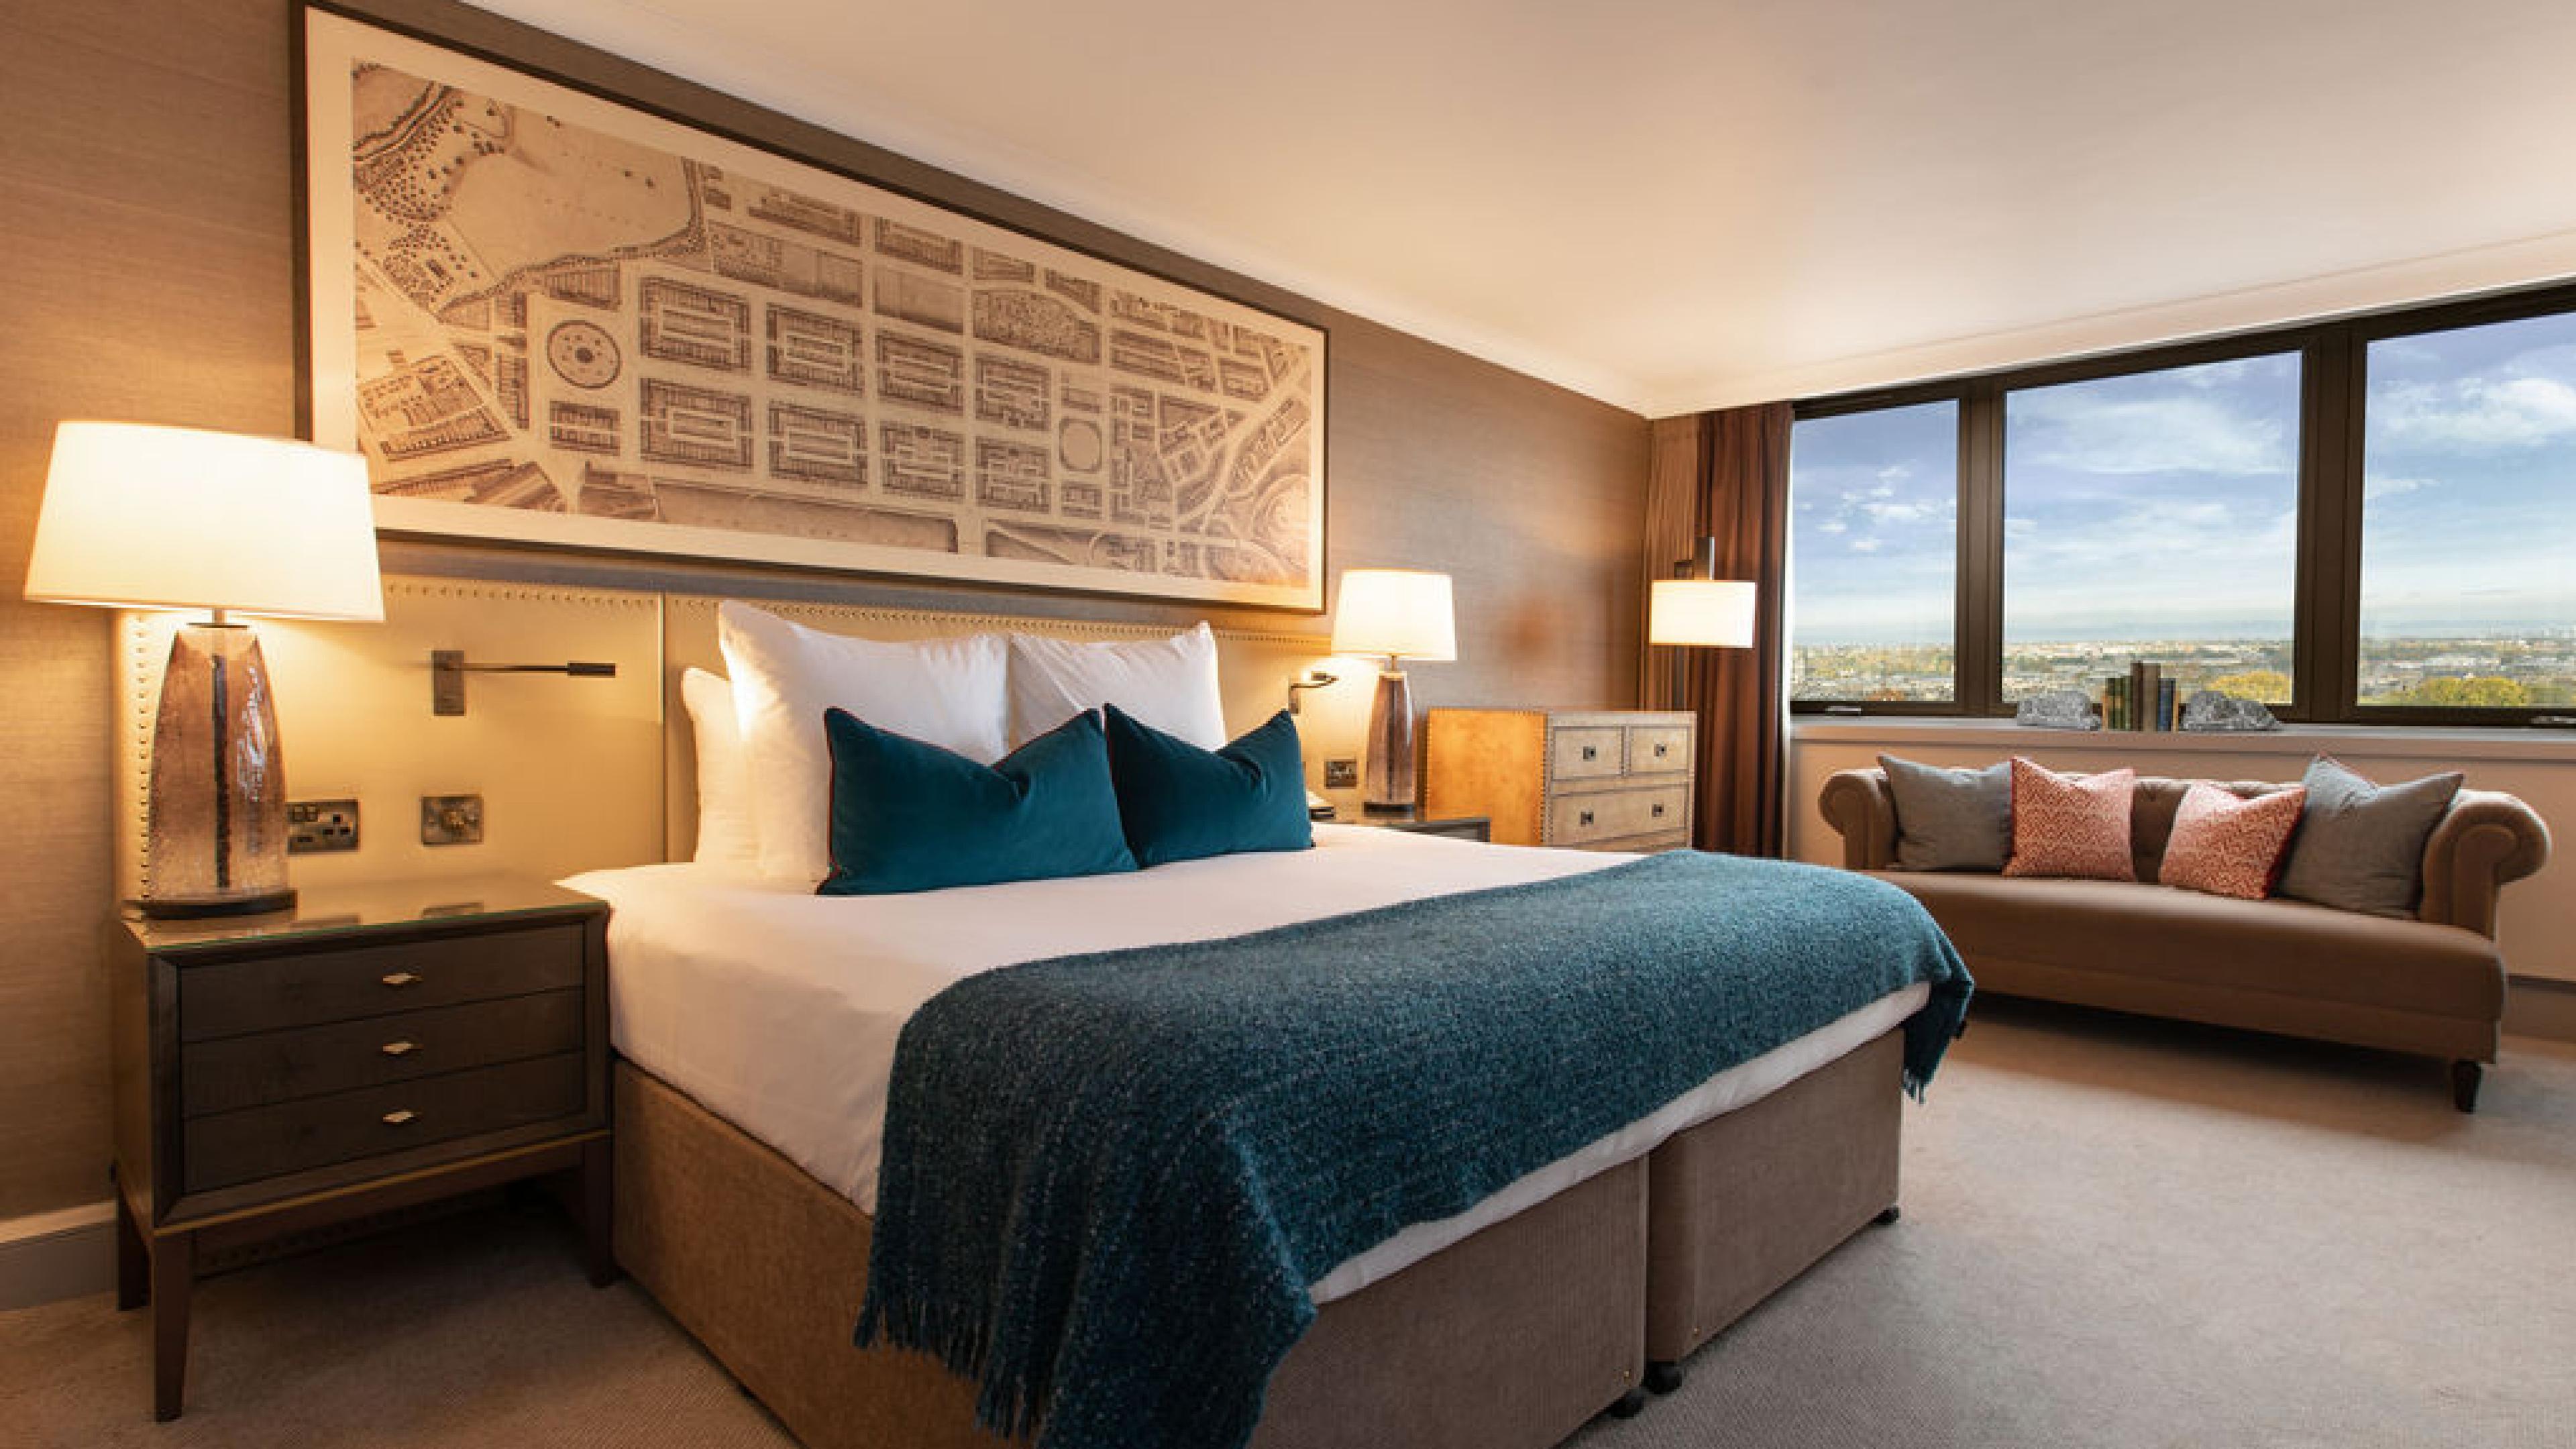 Enjoy views over Edinburgh down to the Forth from our rooms